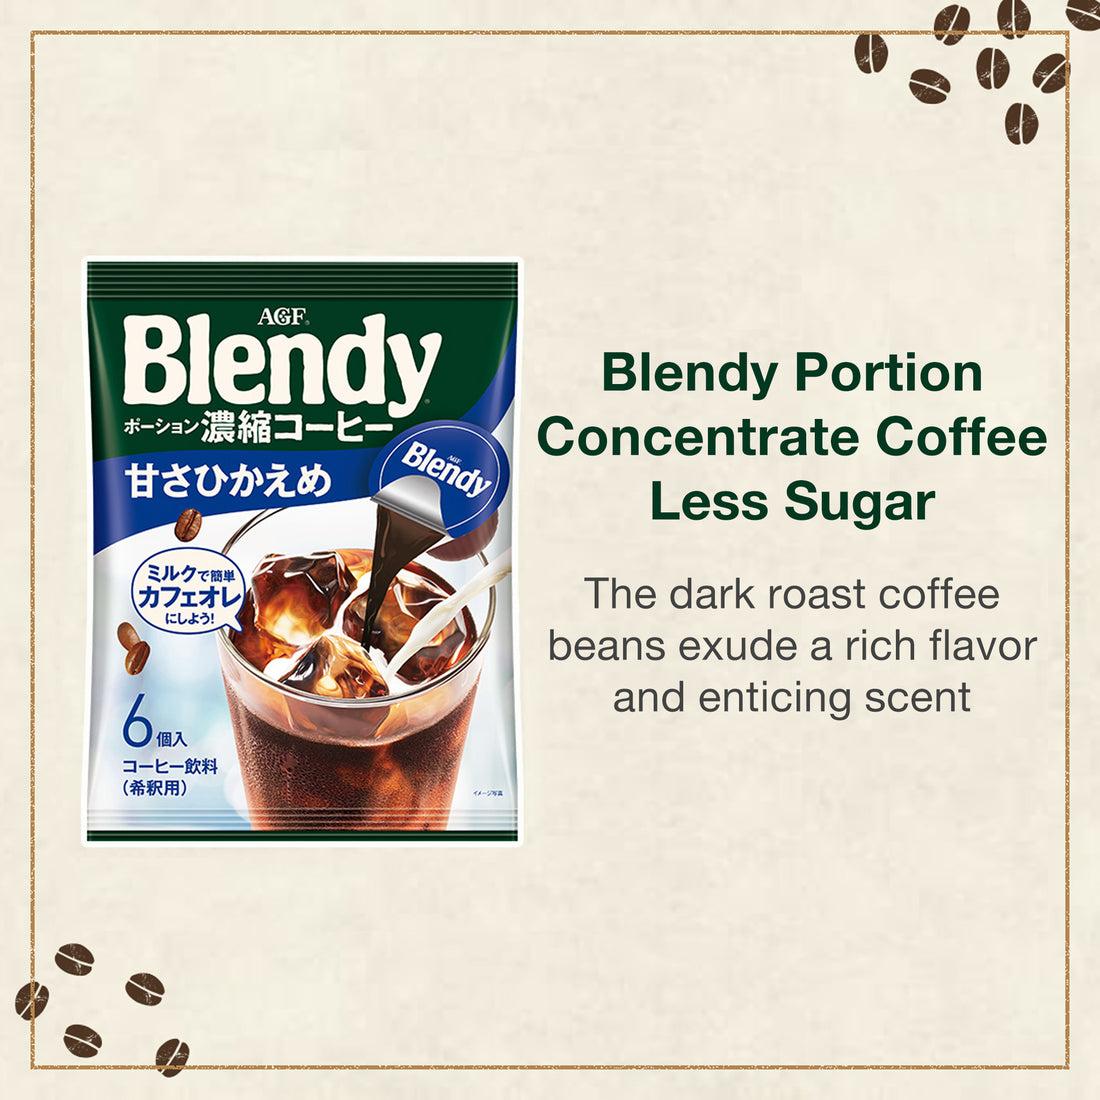 AGF Blendy Portion Concentrated Coffee Less Sugar